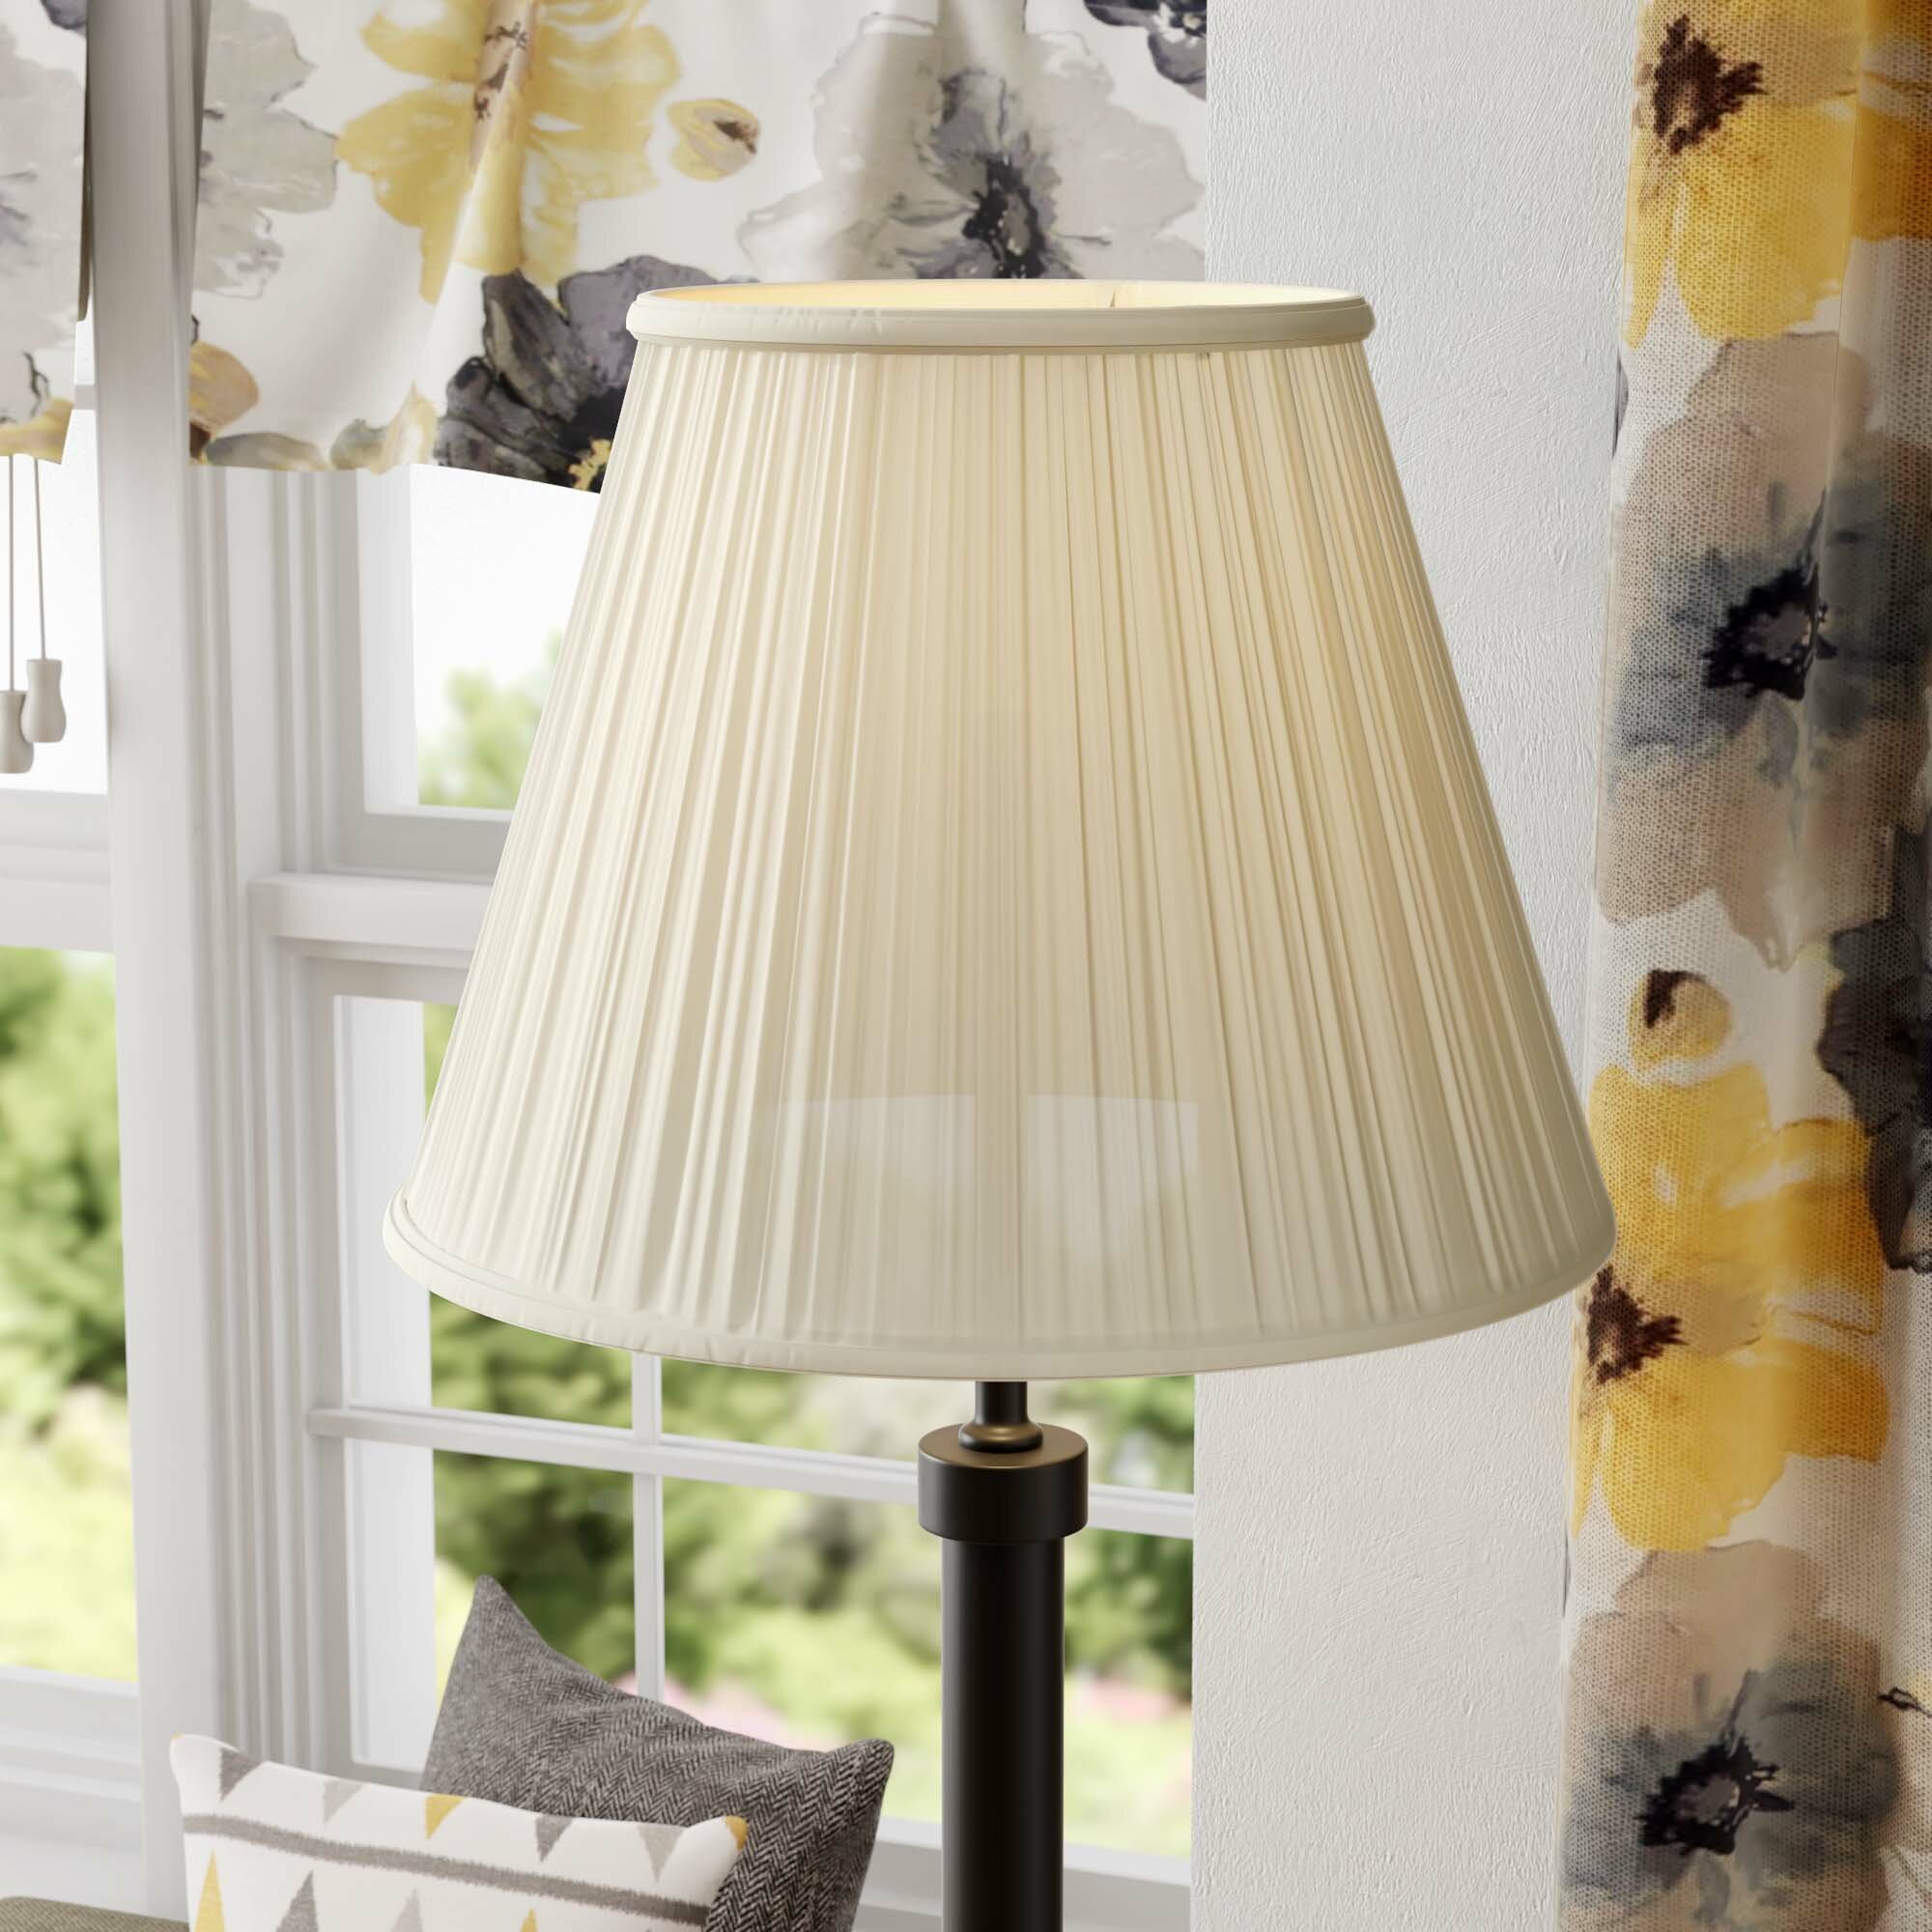 Monter Lite 147-WH 4 x 8 x 6.5 Lampshade Shantung Empire with Piping 